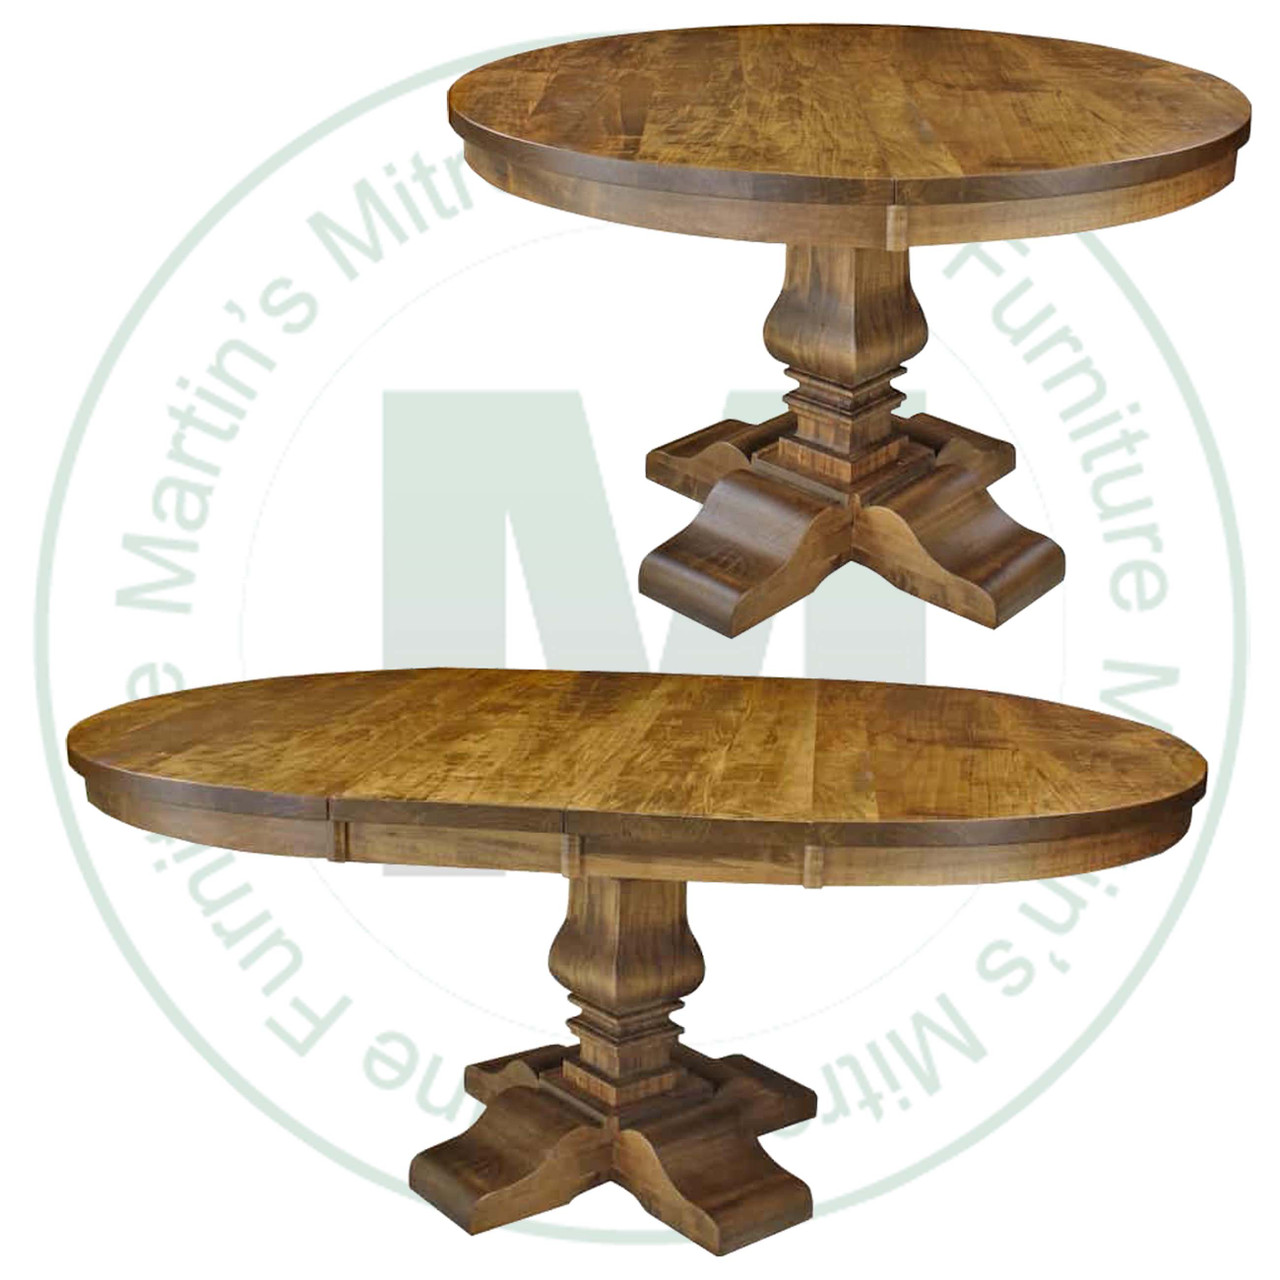 Oak Century Single Pedestal Round Solid Top Table 60'' Deep x 60'' Wide x 30'' High With 2 - 12'' Centre Leaves